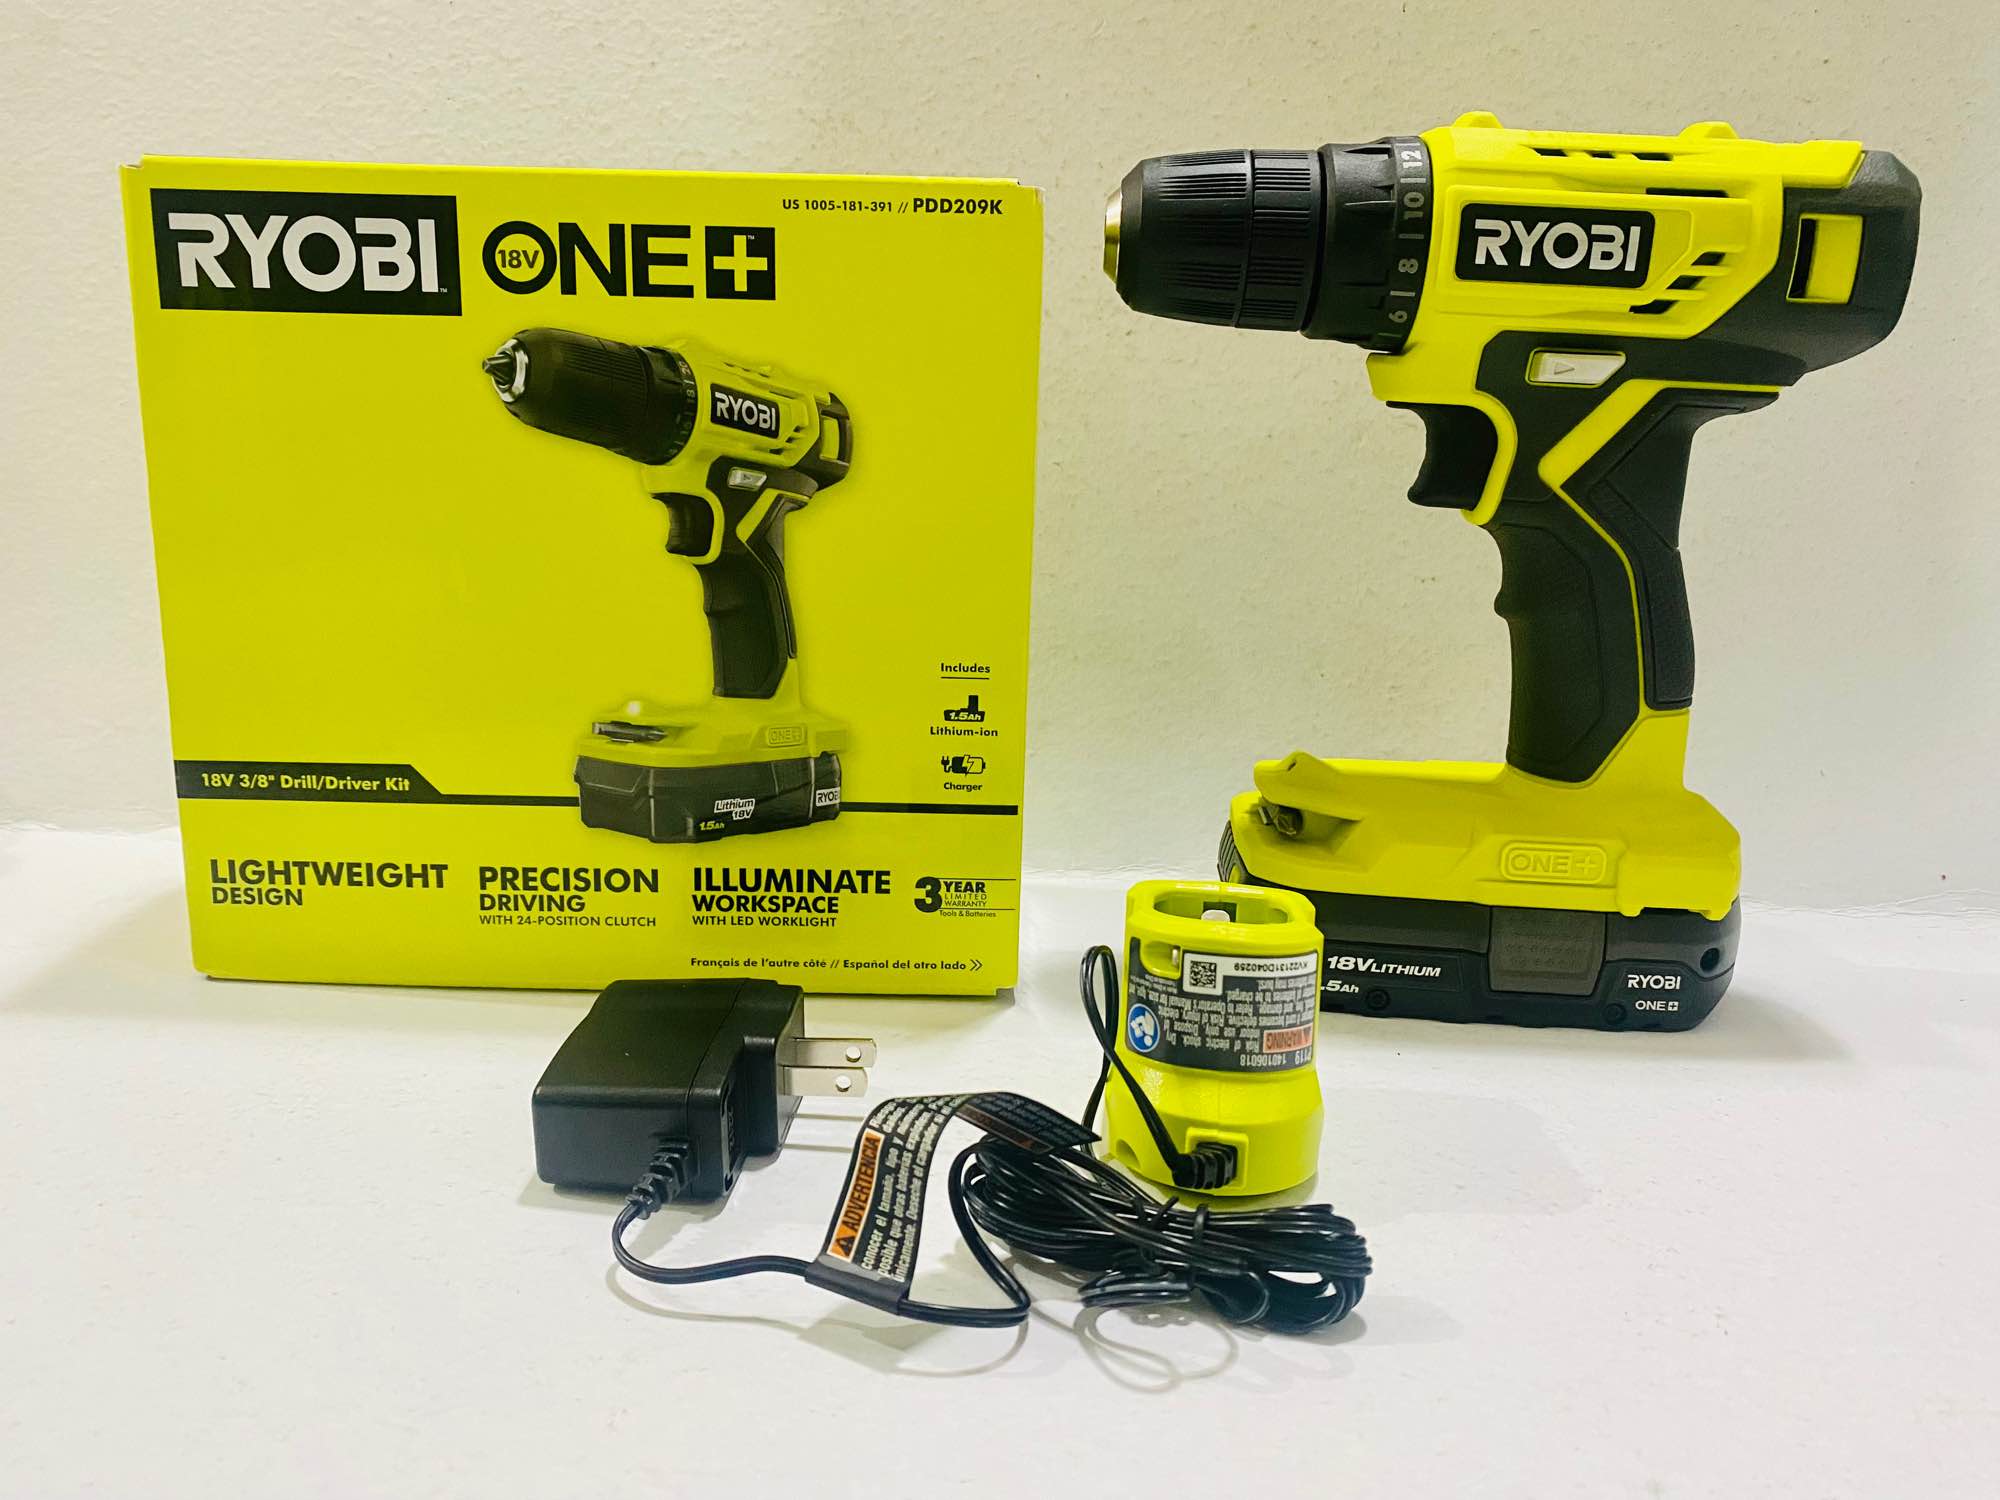 How To Charge A Ryobi Drill